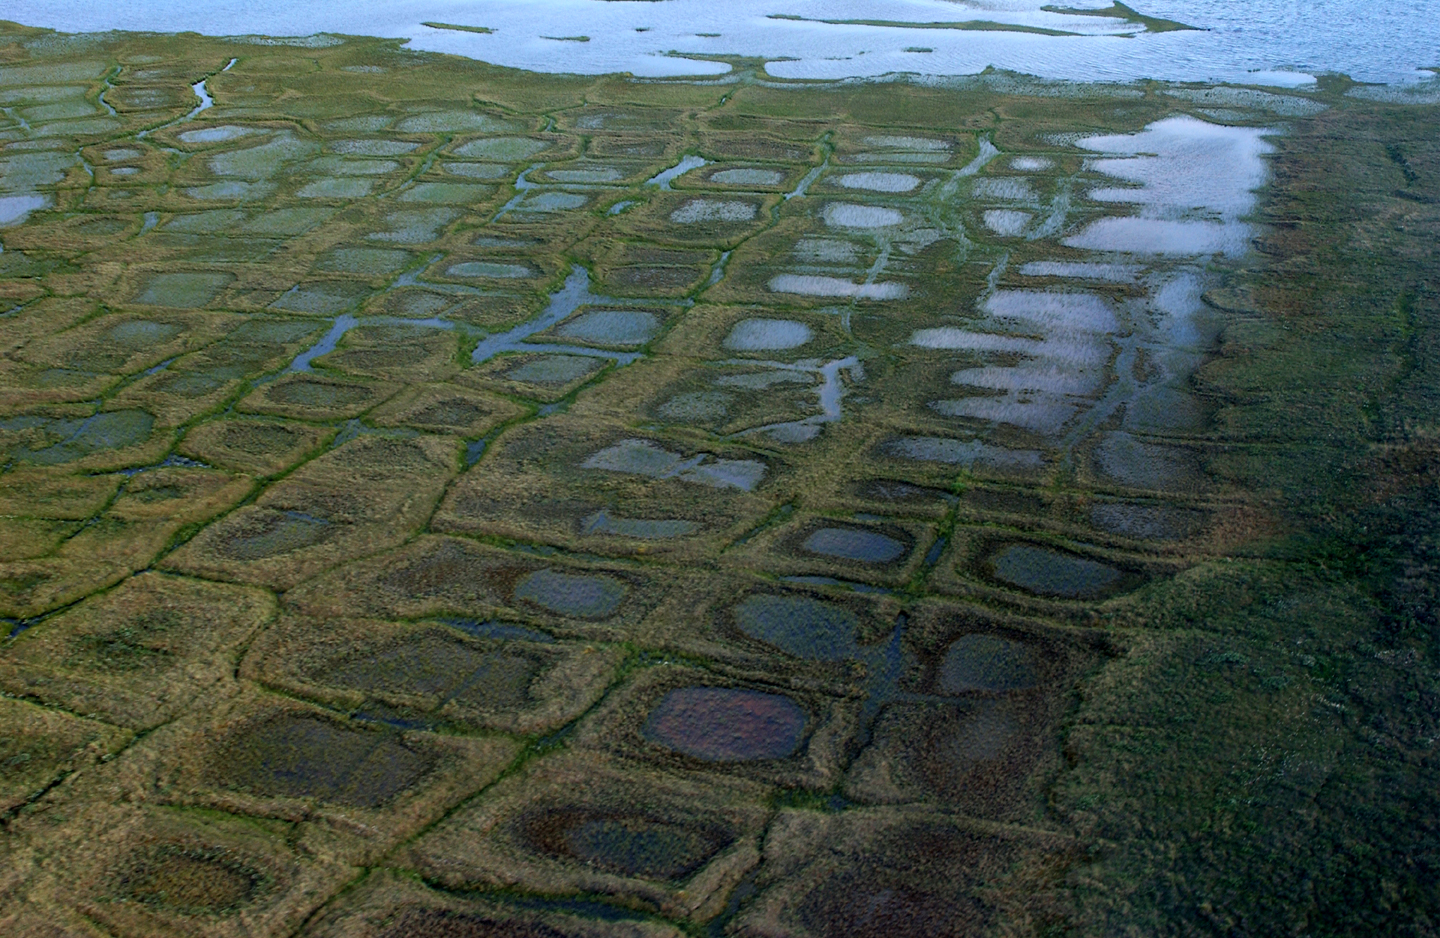 Permafrost forms a grid-like pattern in the National Petroleum Reserve-Alaska, a 22.8 million acre region managed by the Bureau of Land Management on Alaska's North Slope in this undated handout image. USGS/David W Houseknecht
/Handout via REUTERS